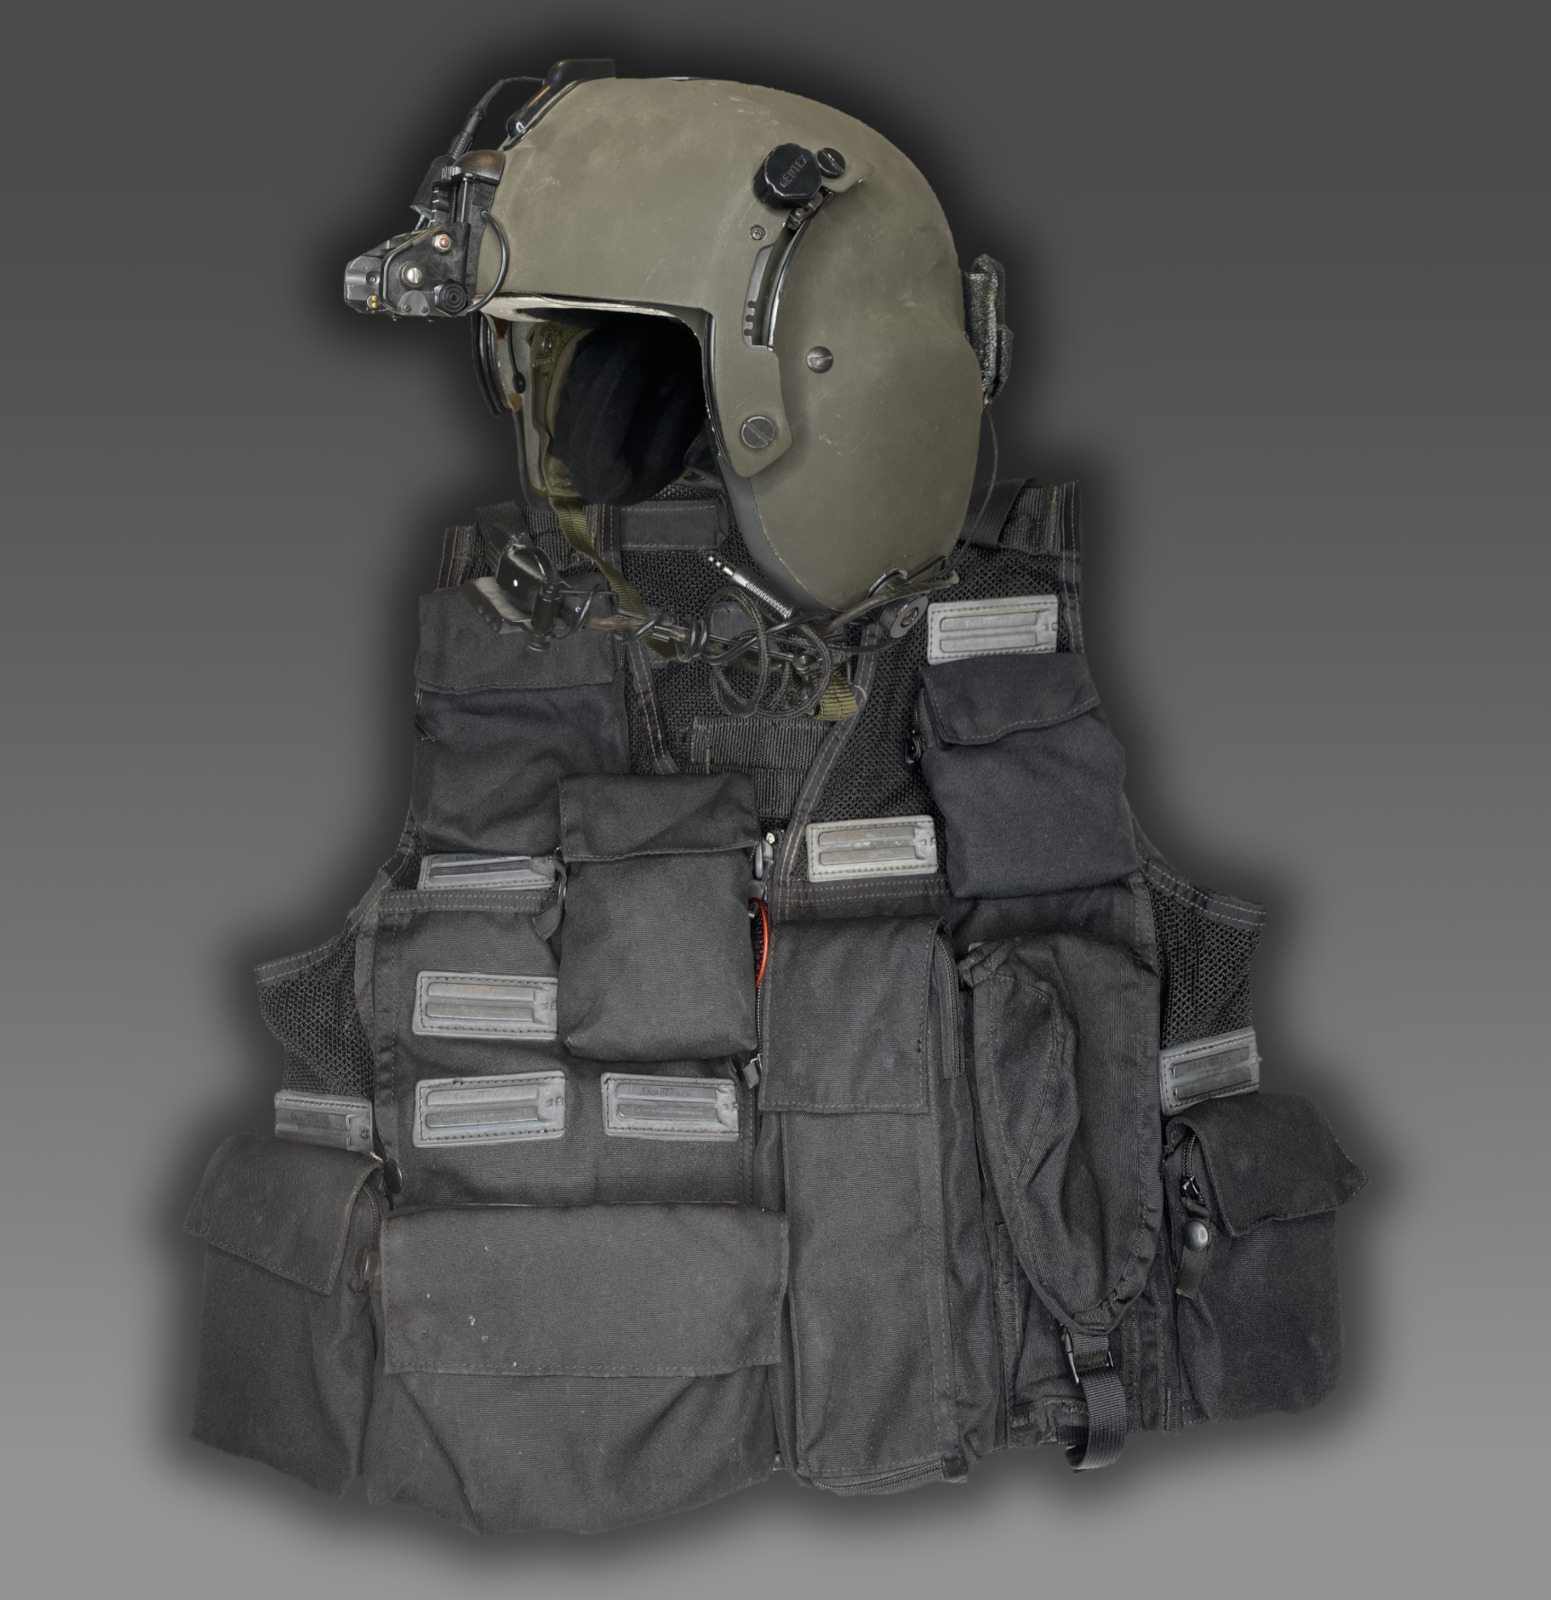 Id'd USAF 76th HS Huey Pilot Grouping HGU-56 Helicopter Helmet Air Survival Vest